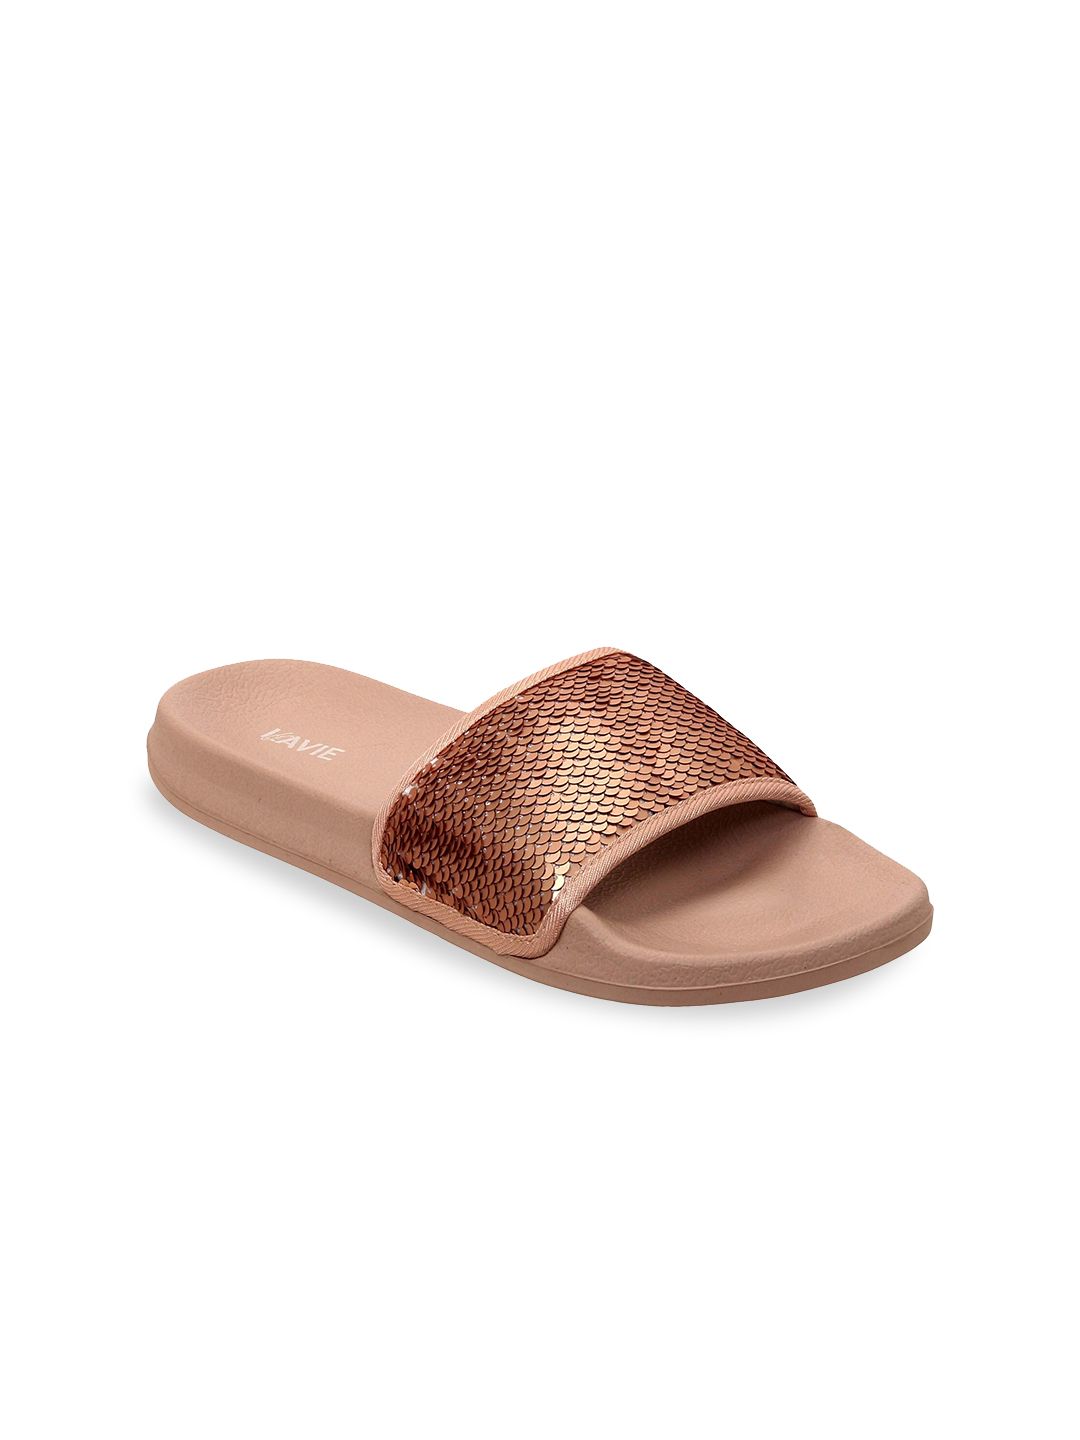 Lavie Women Rose Gold-Toned Embellished Sliders Price in India